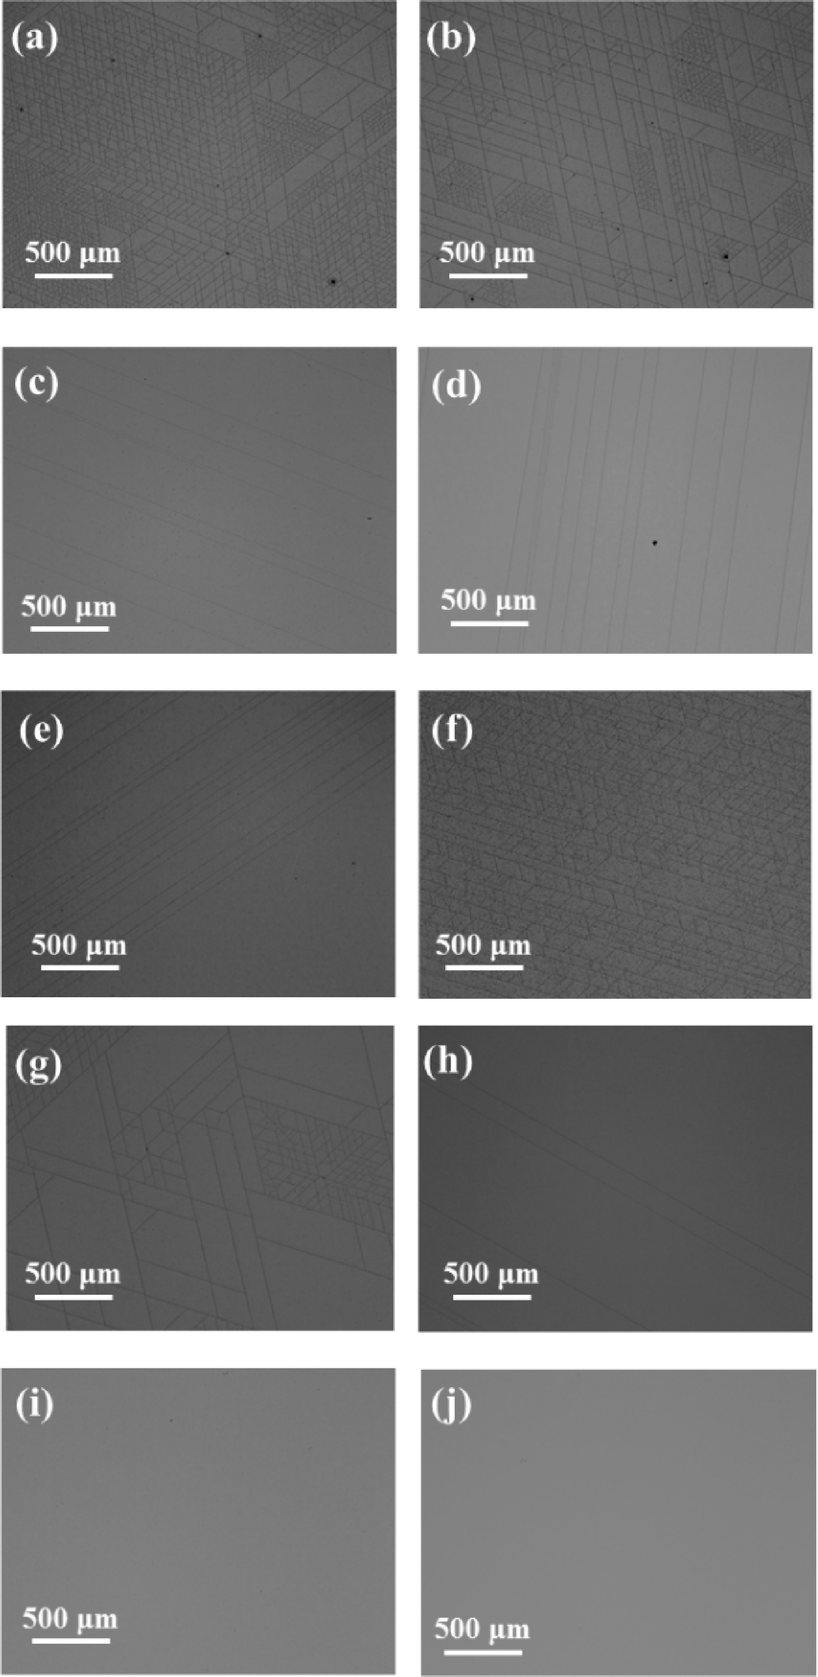 High-quality crack-free GaN epitaxial films grown on Si substrates 